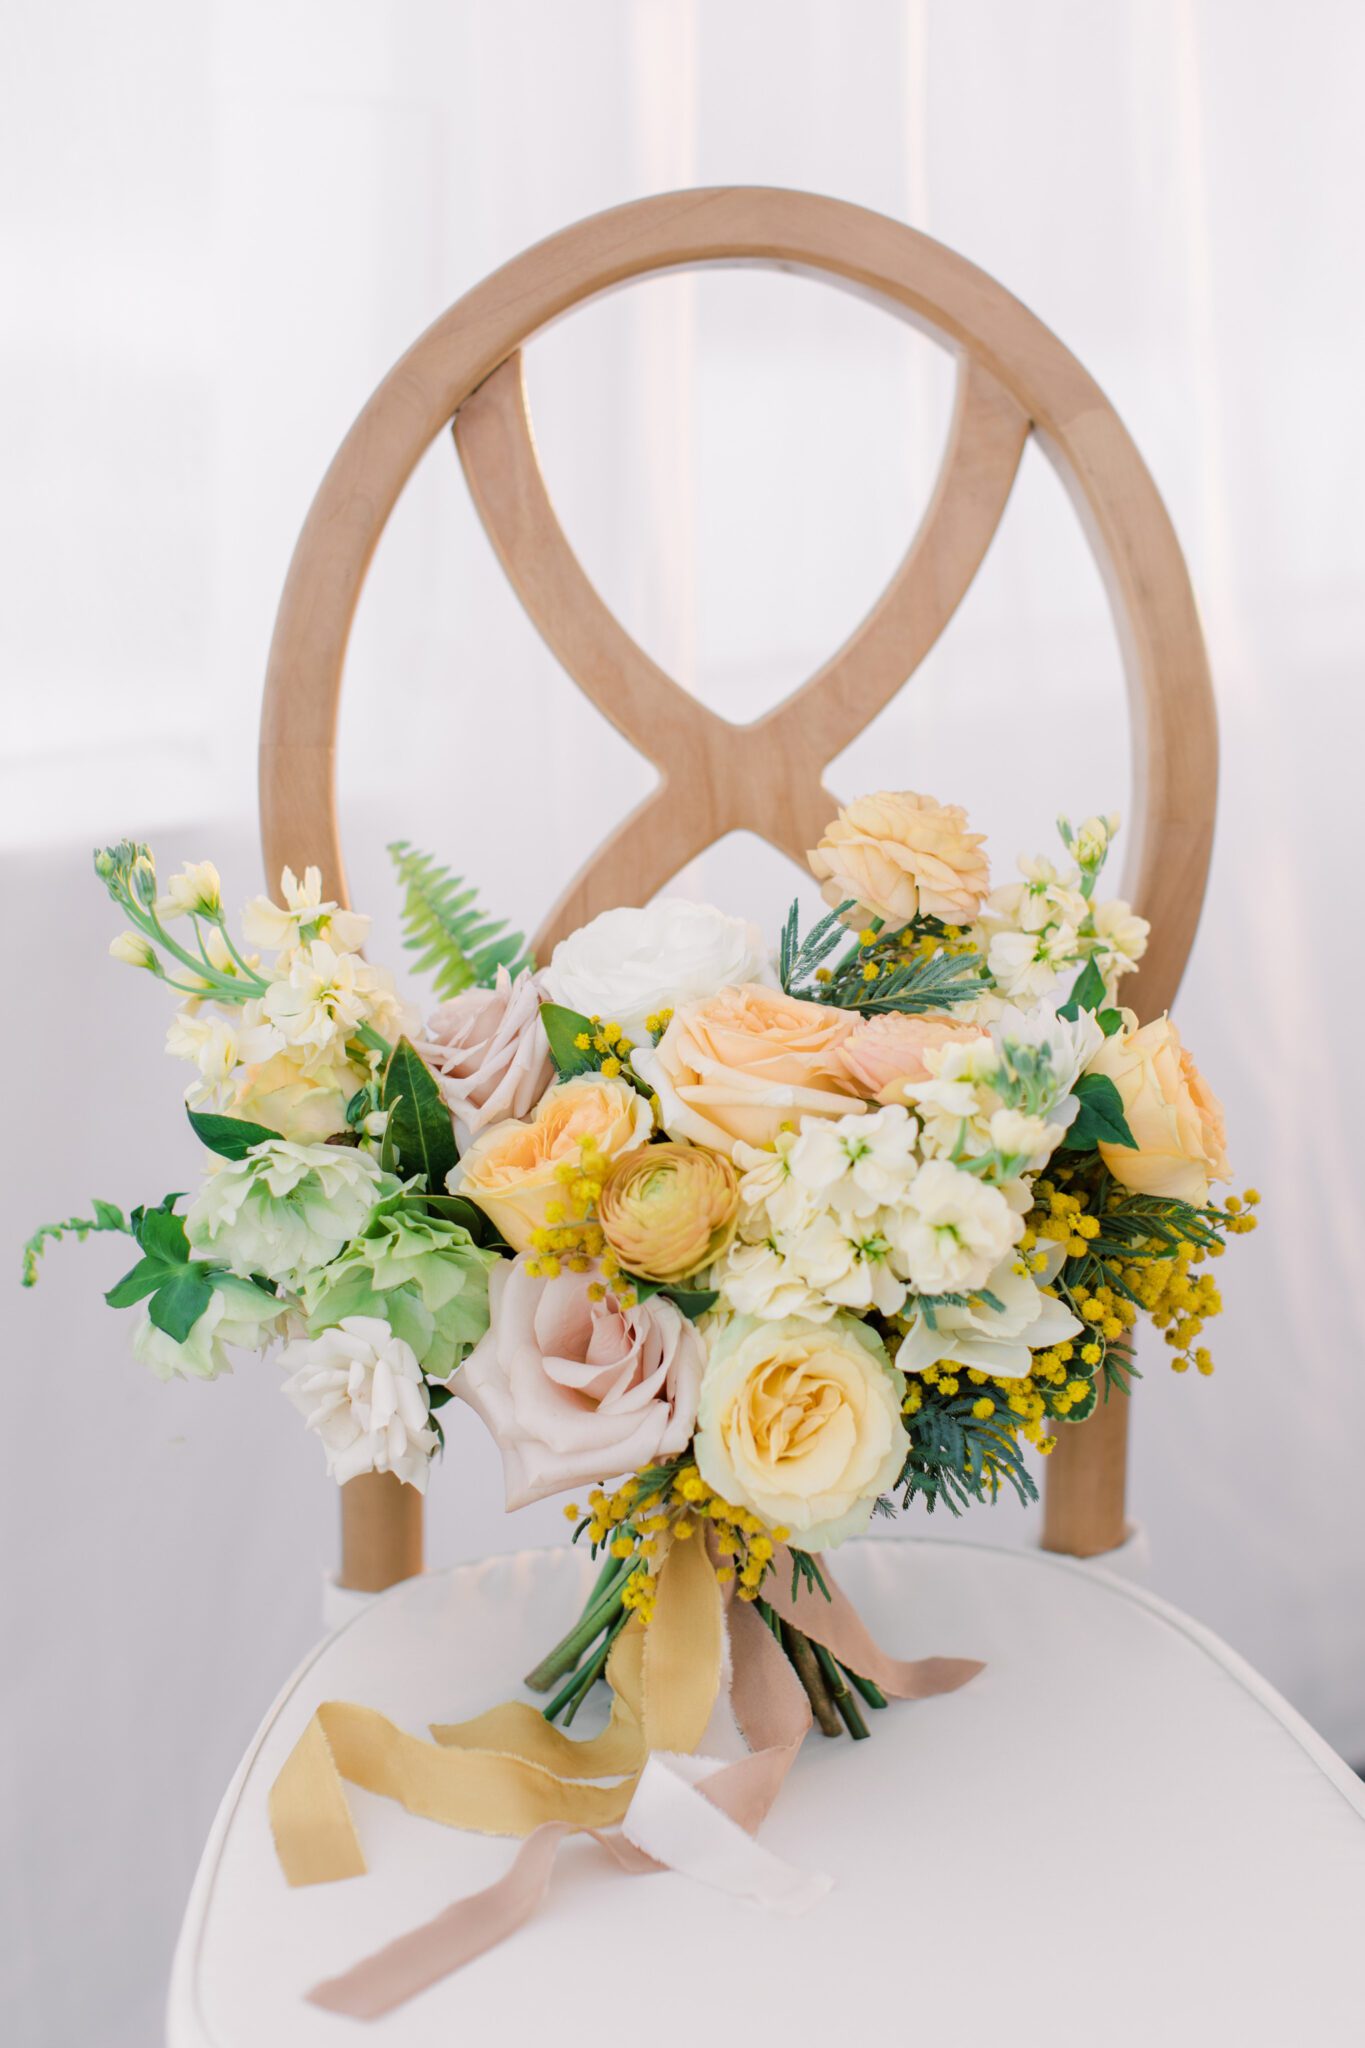 Spring inspired yellow, pink and peach wedding bouquet including  roses, ranunculus, and ferns designed by Little Petal Company